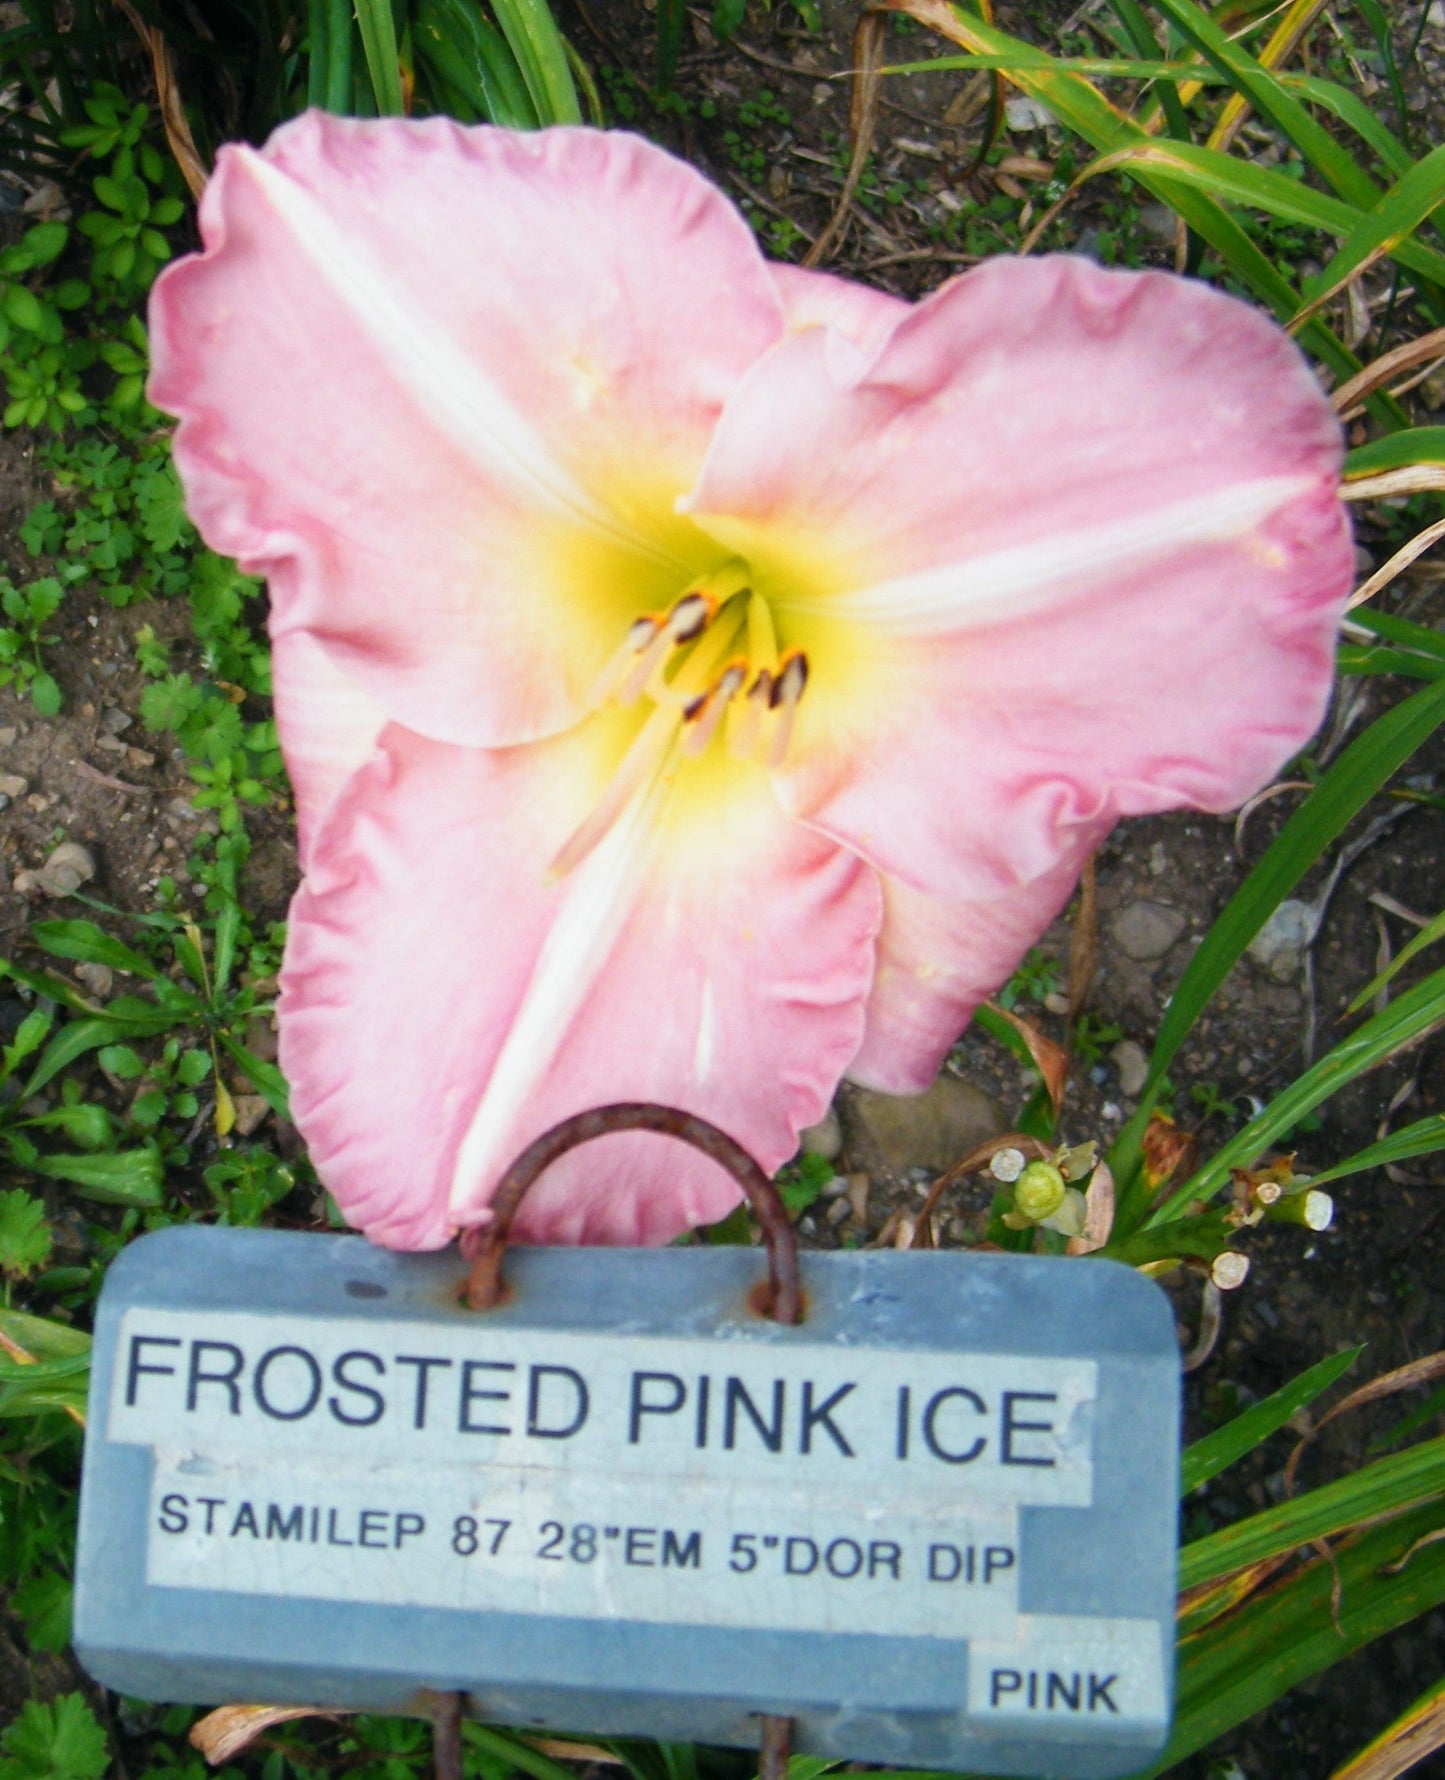 FROSTED PINK ICE